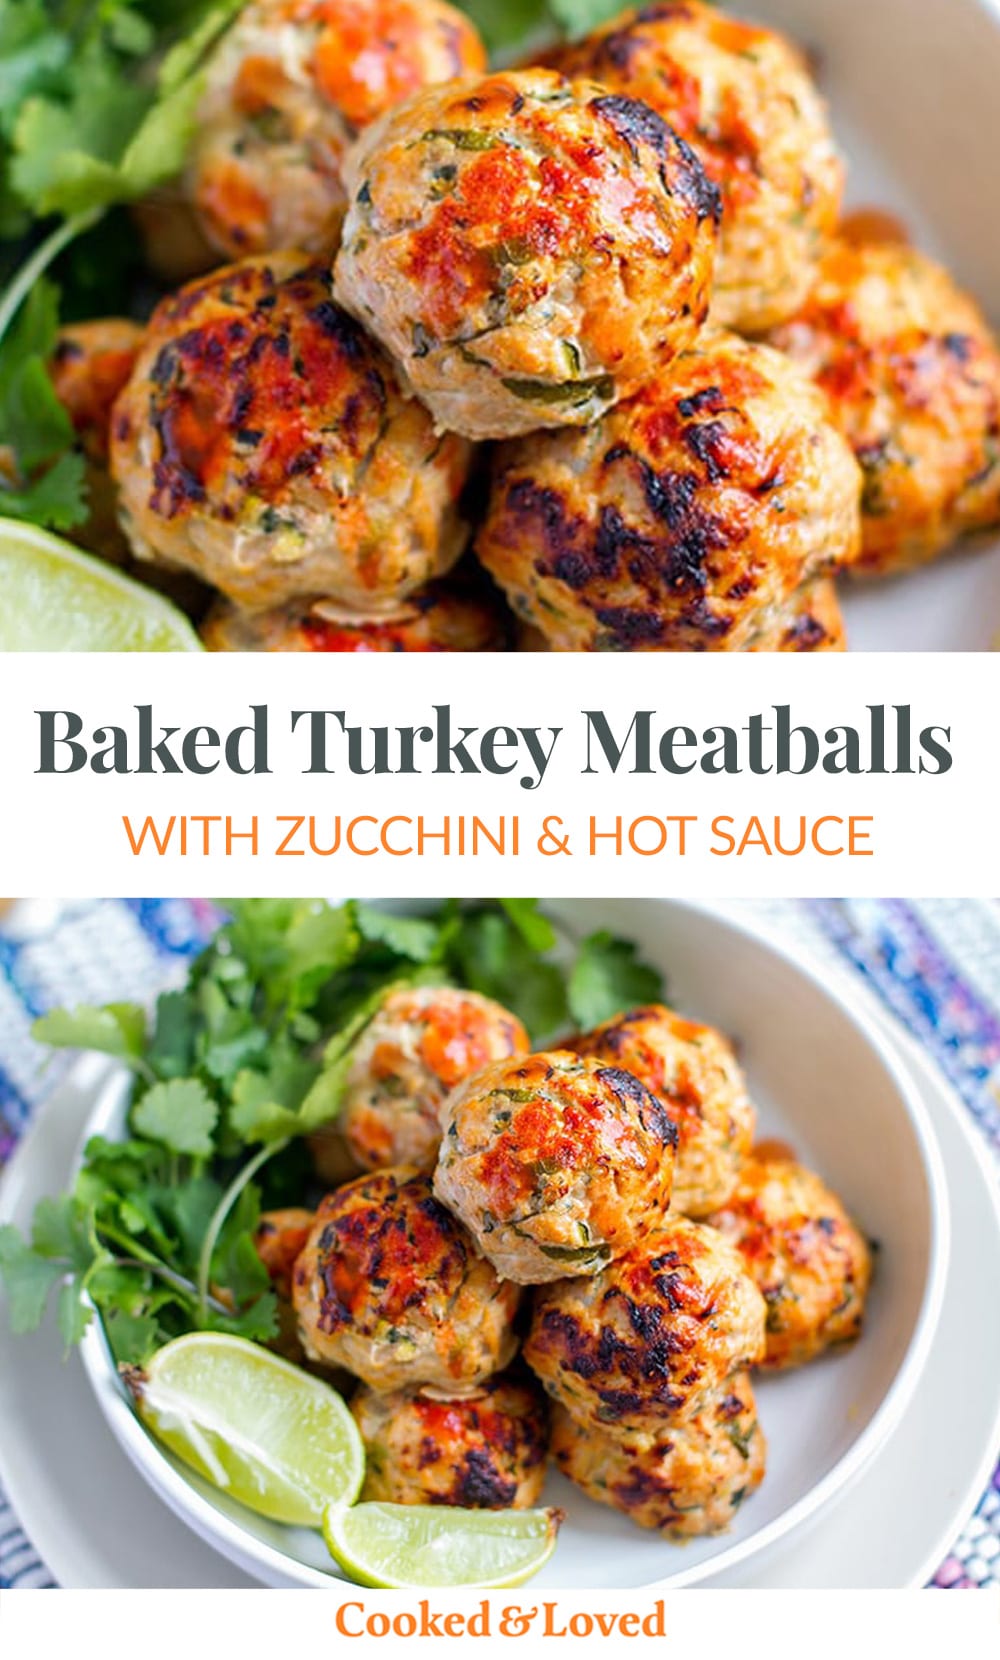 Baked Turkey Meatballs With Zucchini